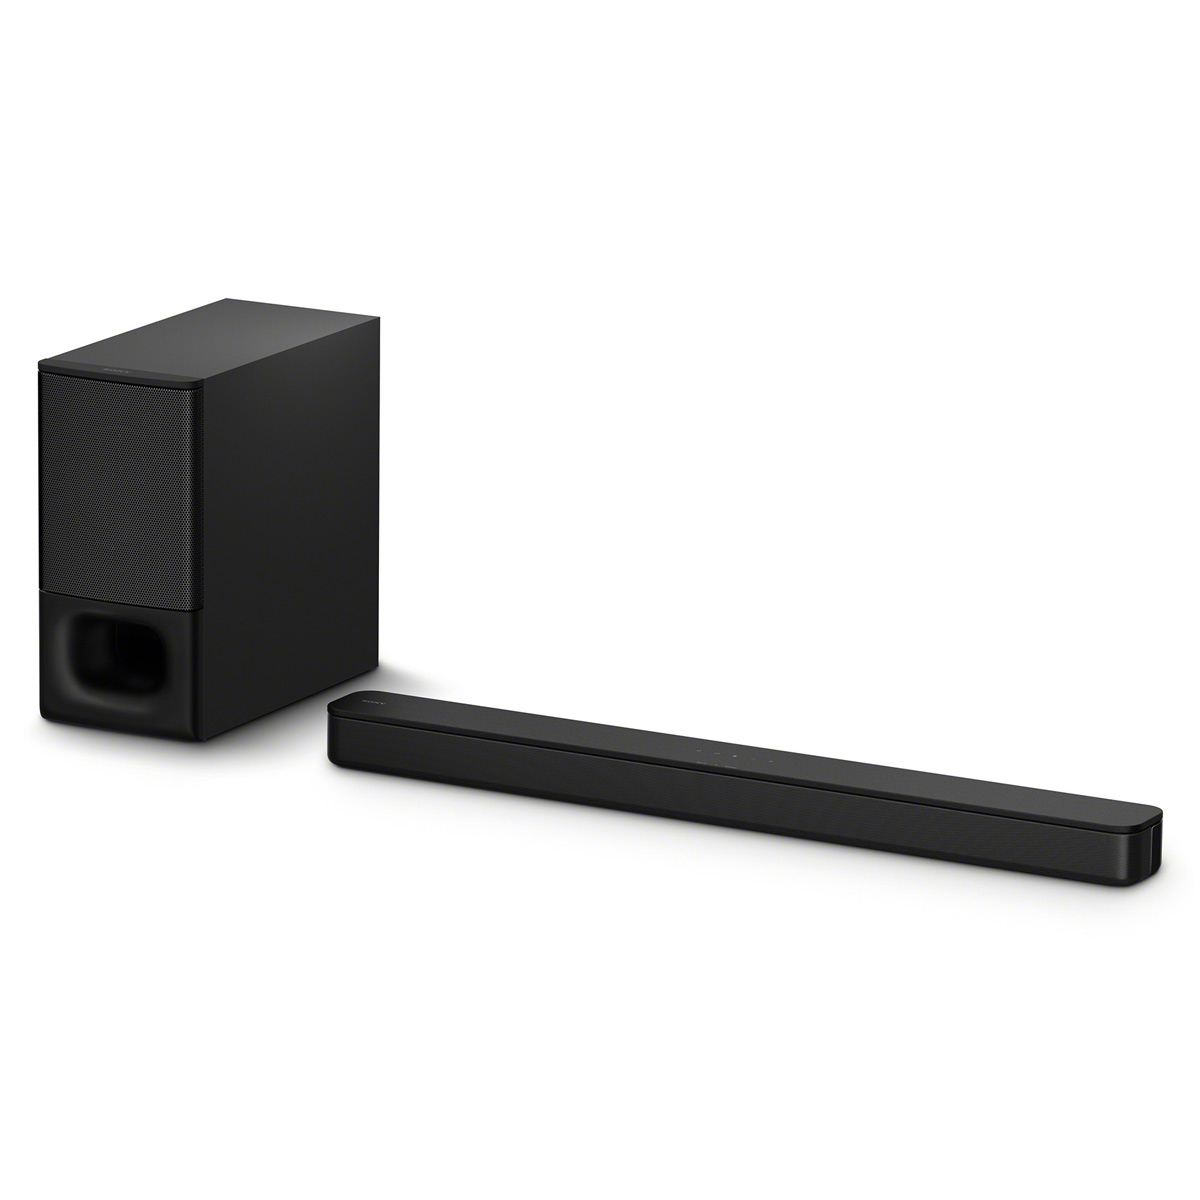 Sony HTS350 2.1 Channel Soundbar with Powerful Wireless Subwoofer and Bluetooth - image 1 of 11